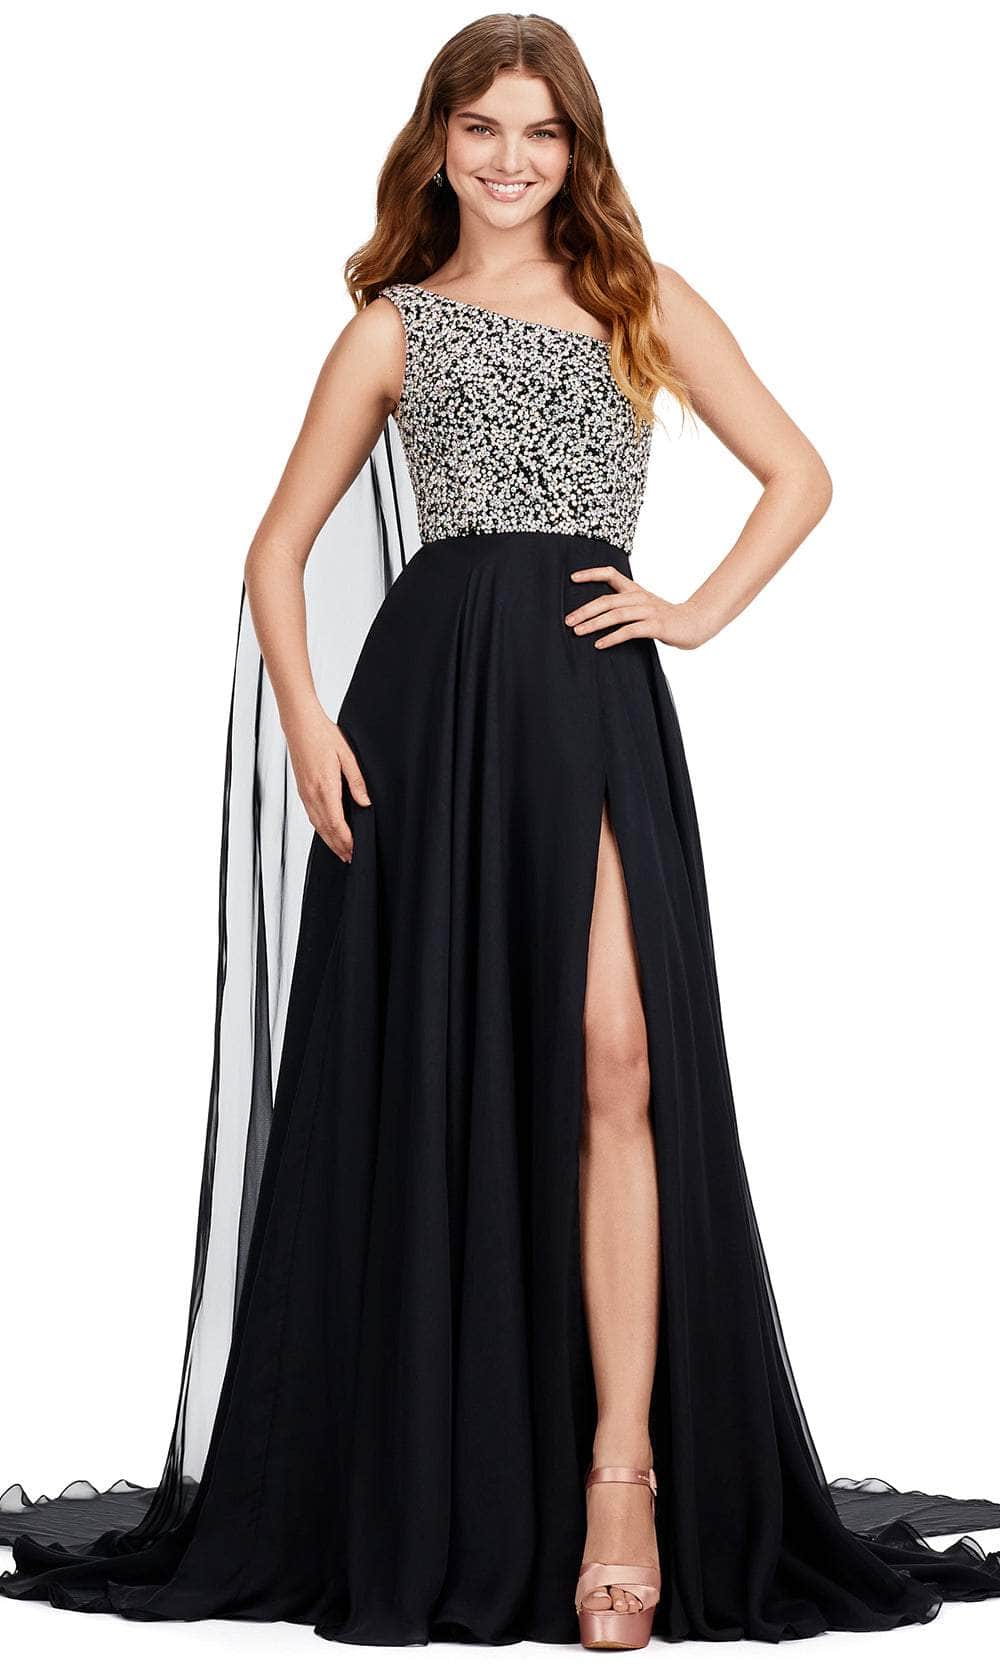 Image of Ashley Lauren 11482 - One Shoulder Prom Gown with Cape